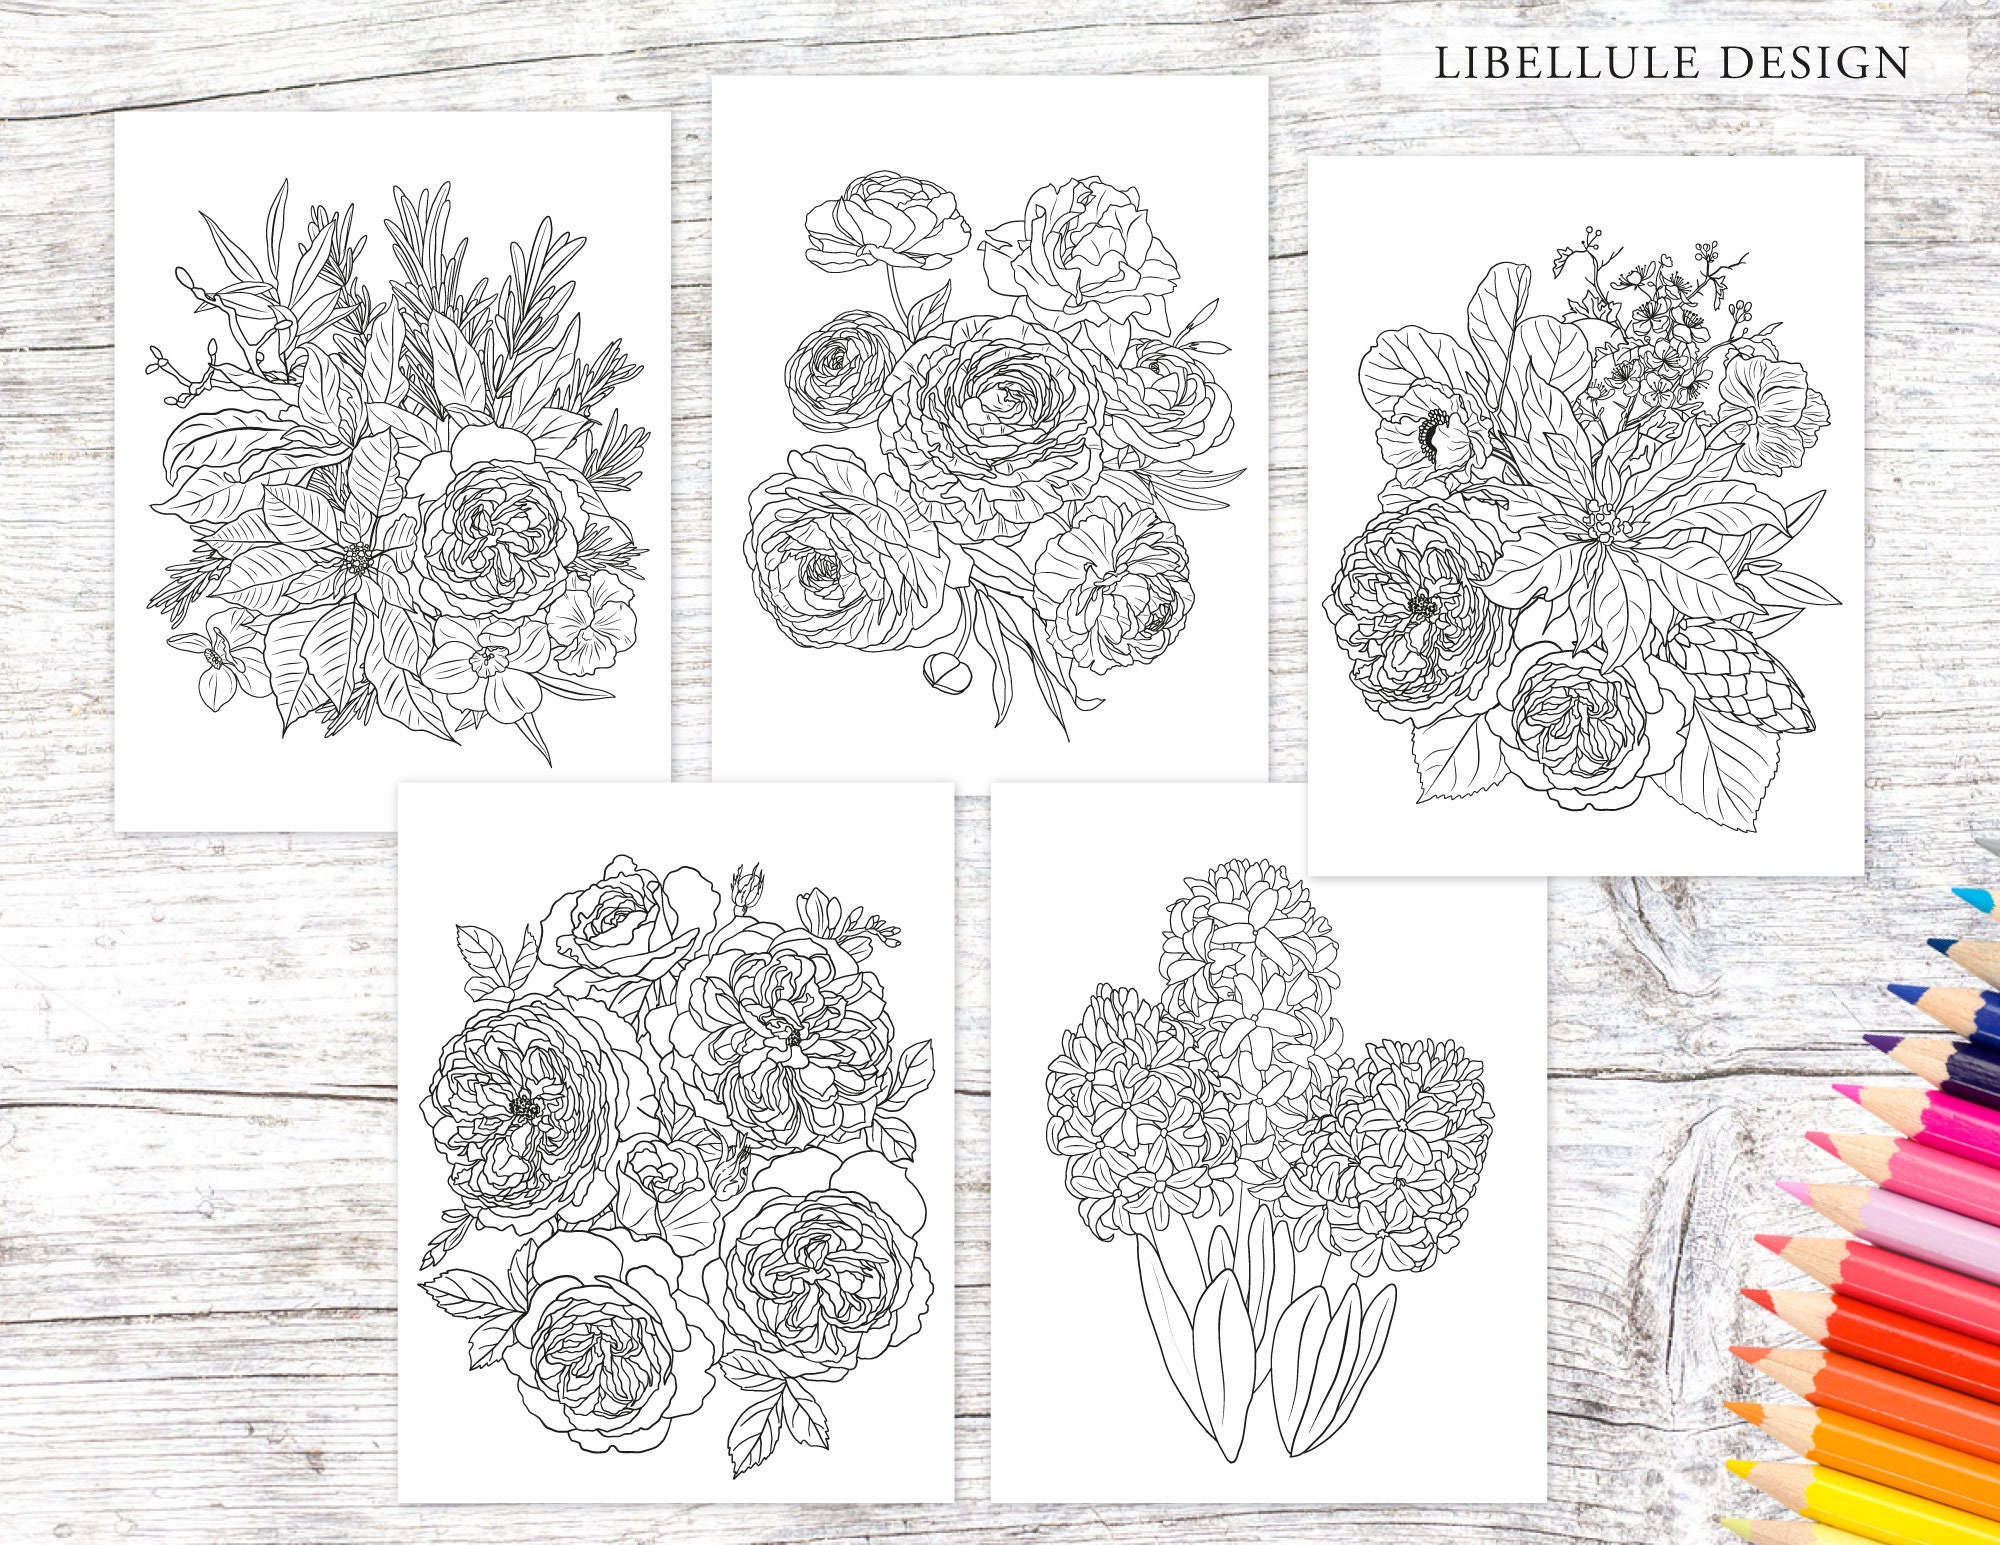 Printable Flower Coloring Pages   20 Adult Coloring Pages   Roses,  Poinsetia, Ranunculus, Hyacinth   Digital Instant Download